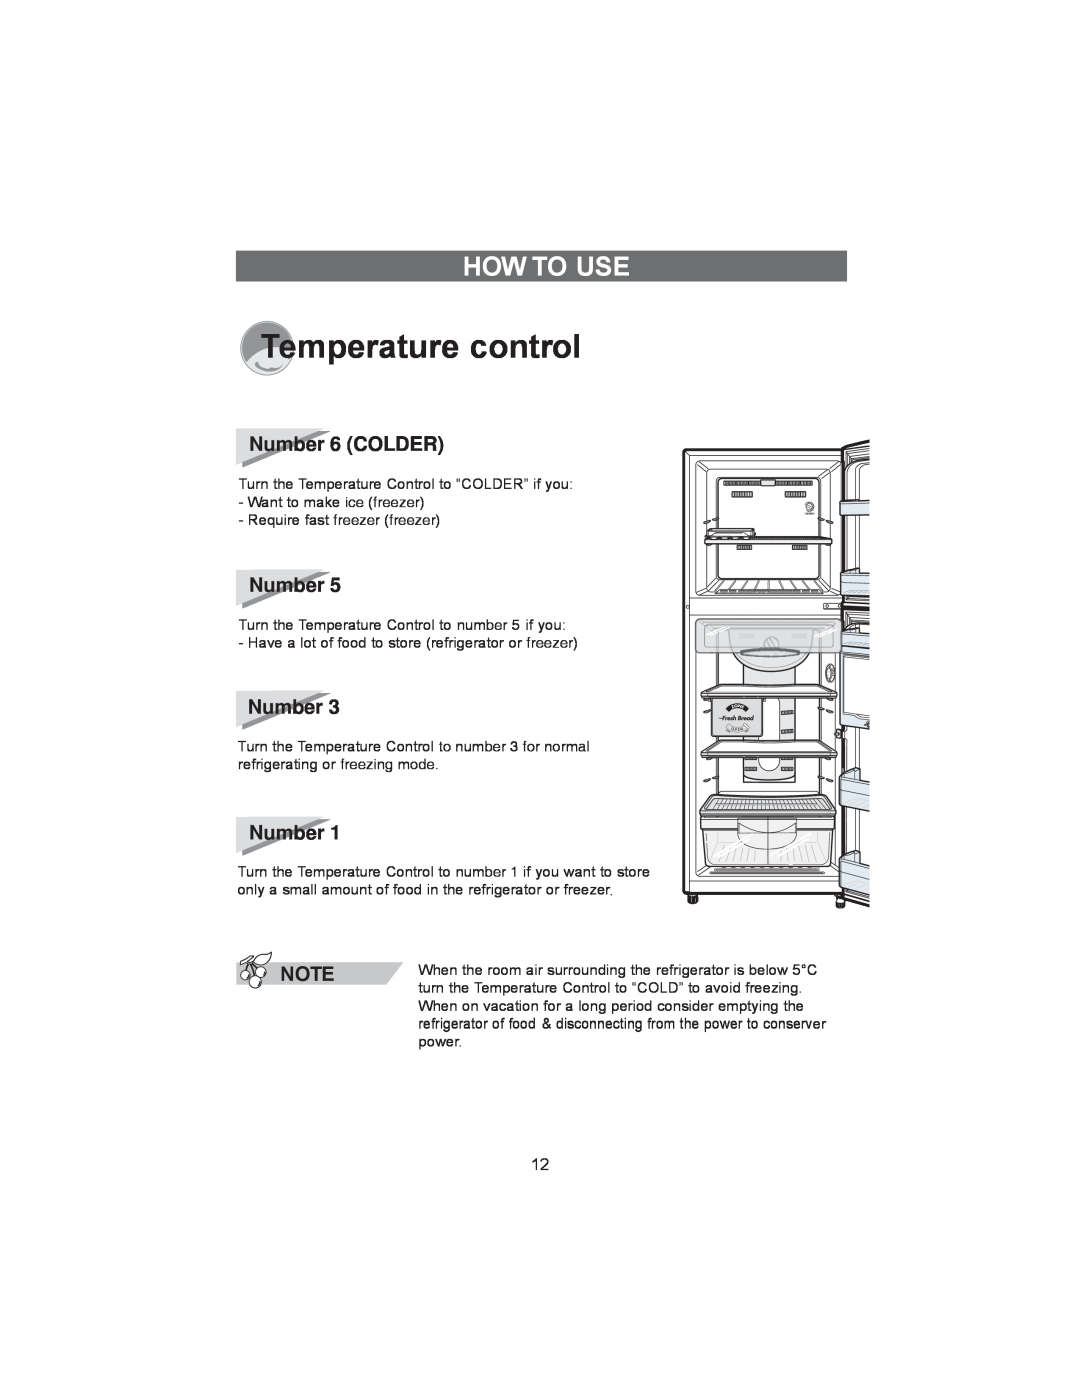 Samsung RT30S, RT37D, RT34G, RT37G, RT37S, RT30G, RT34S, RT34D, RT30D manual How To Use, Number 6 COLDER, Temperature control 